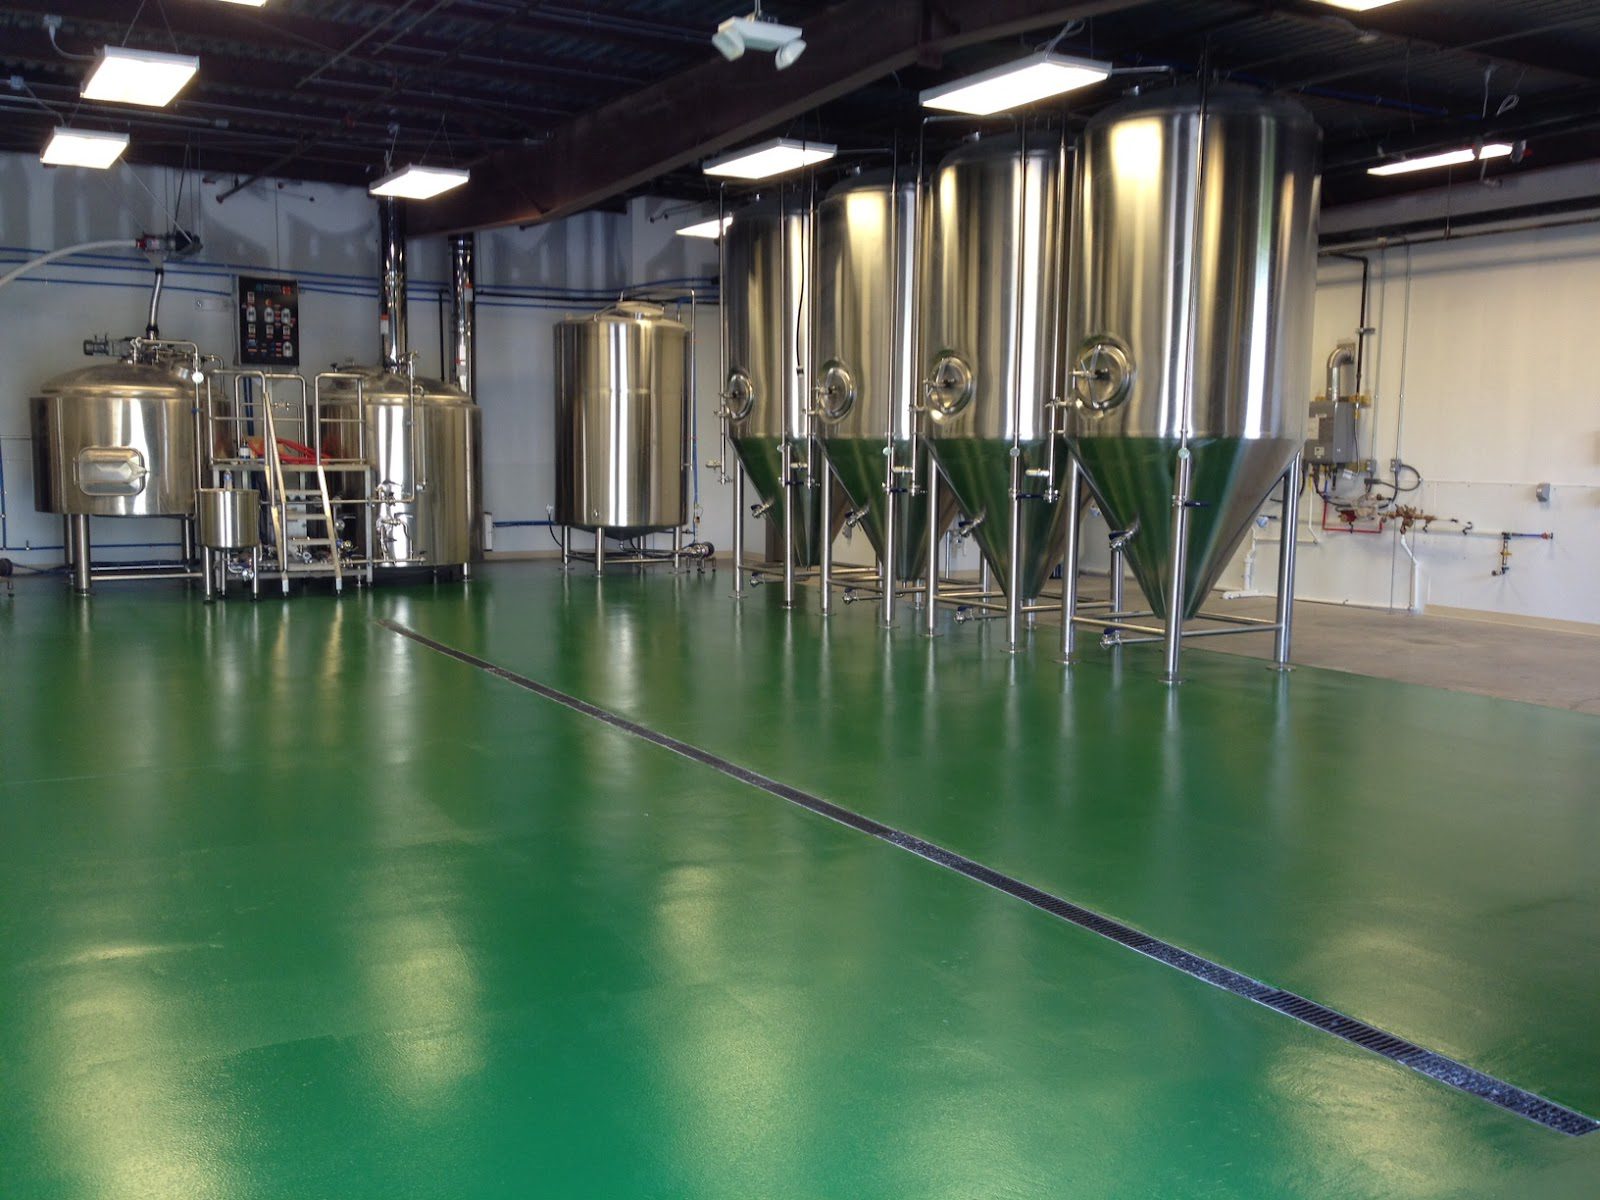 How to Choose Flooring for Your Restaurant or Brewery | Duraamen Engineered Products Inc